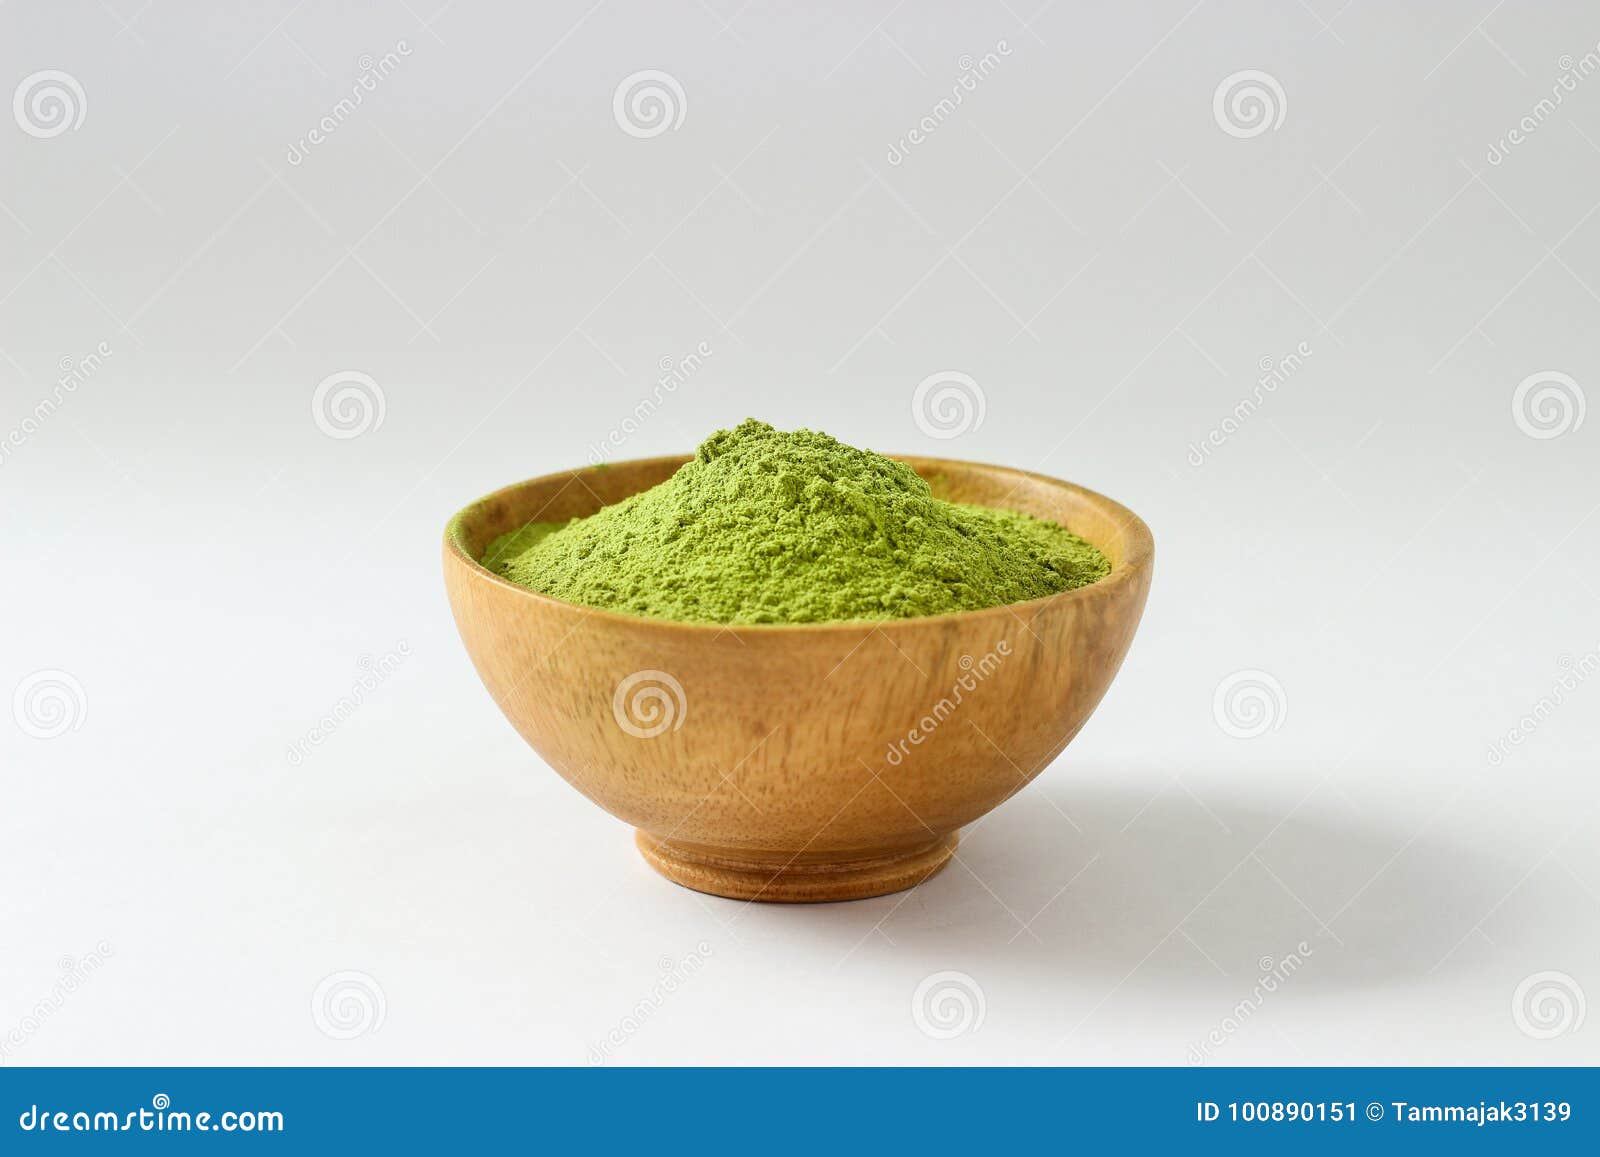 closed up isolate heap of extract green tea powder in wooden bo